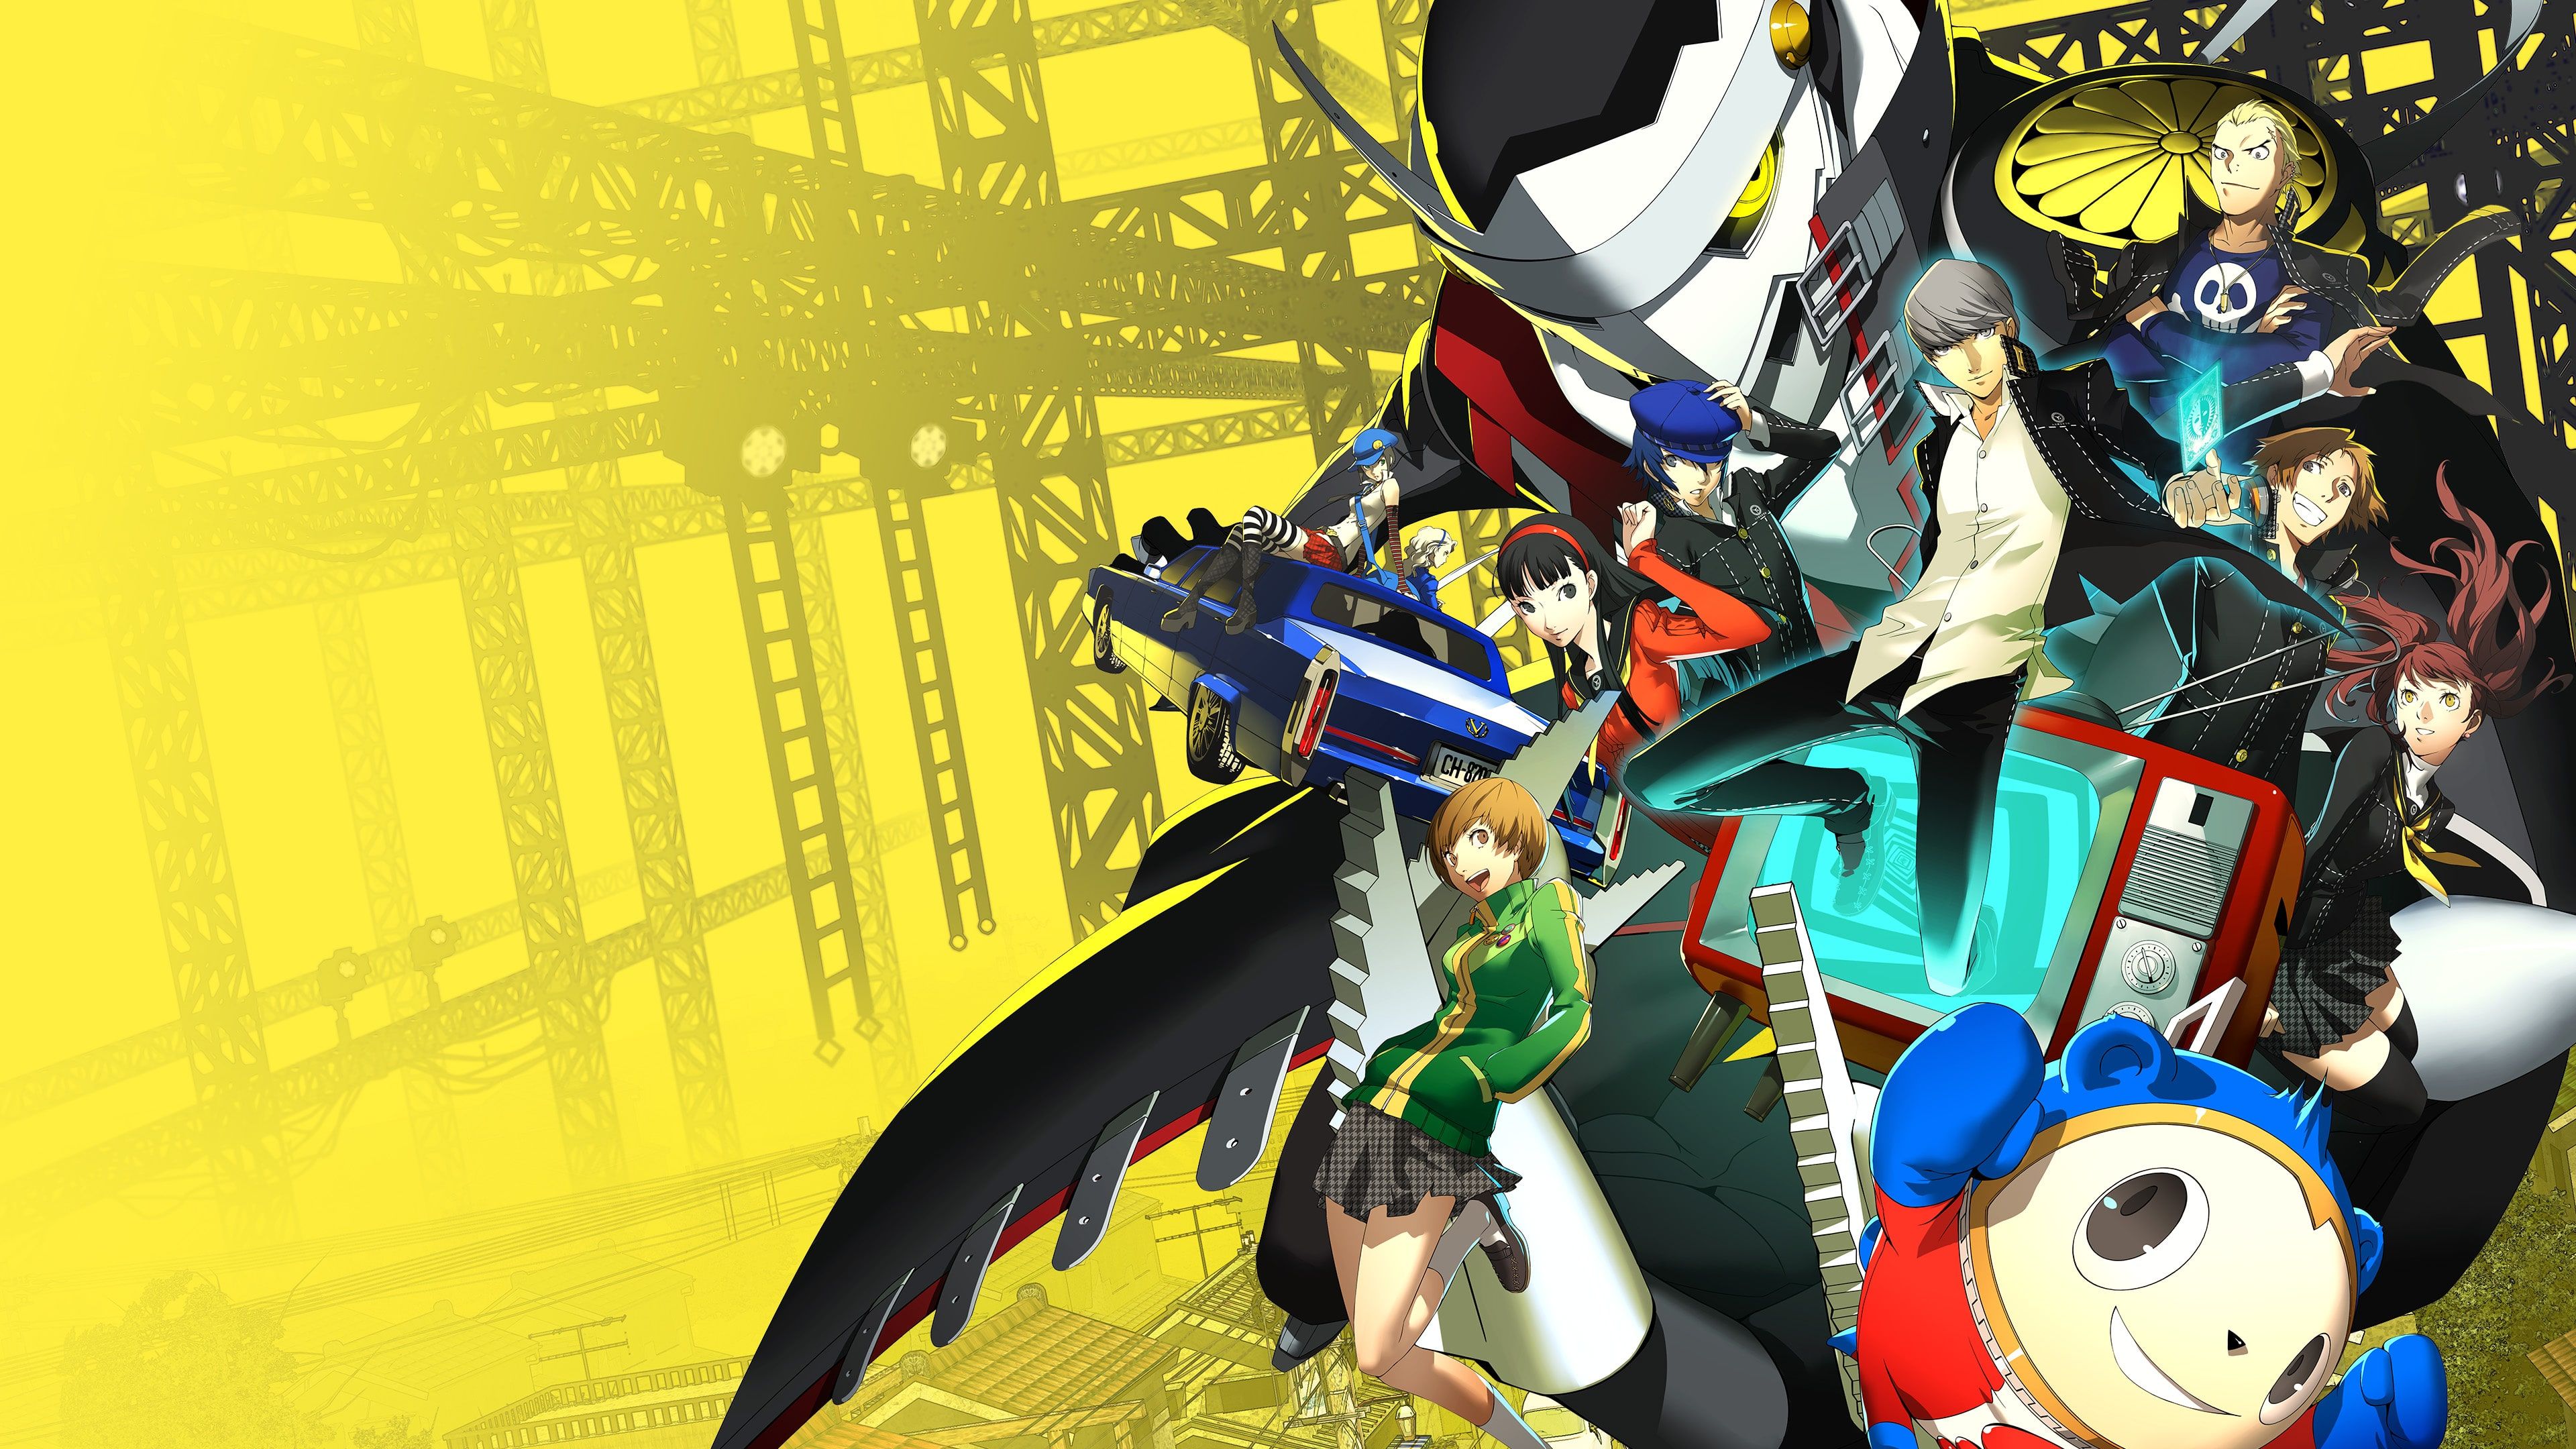 Persona 4 Golden cover image